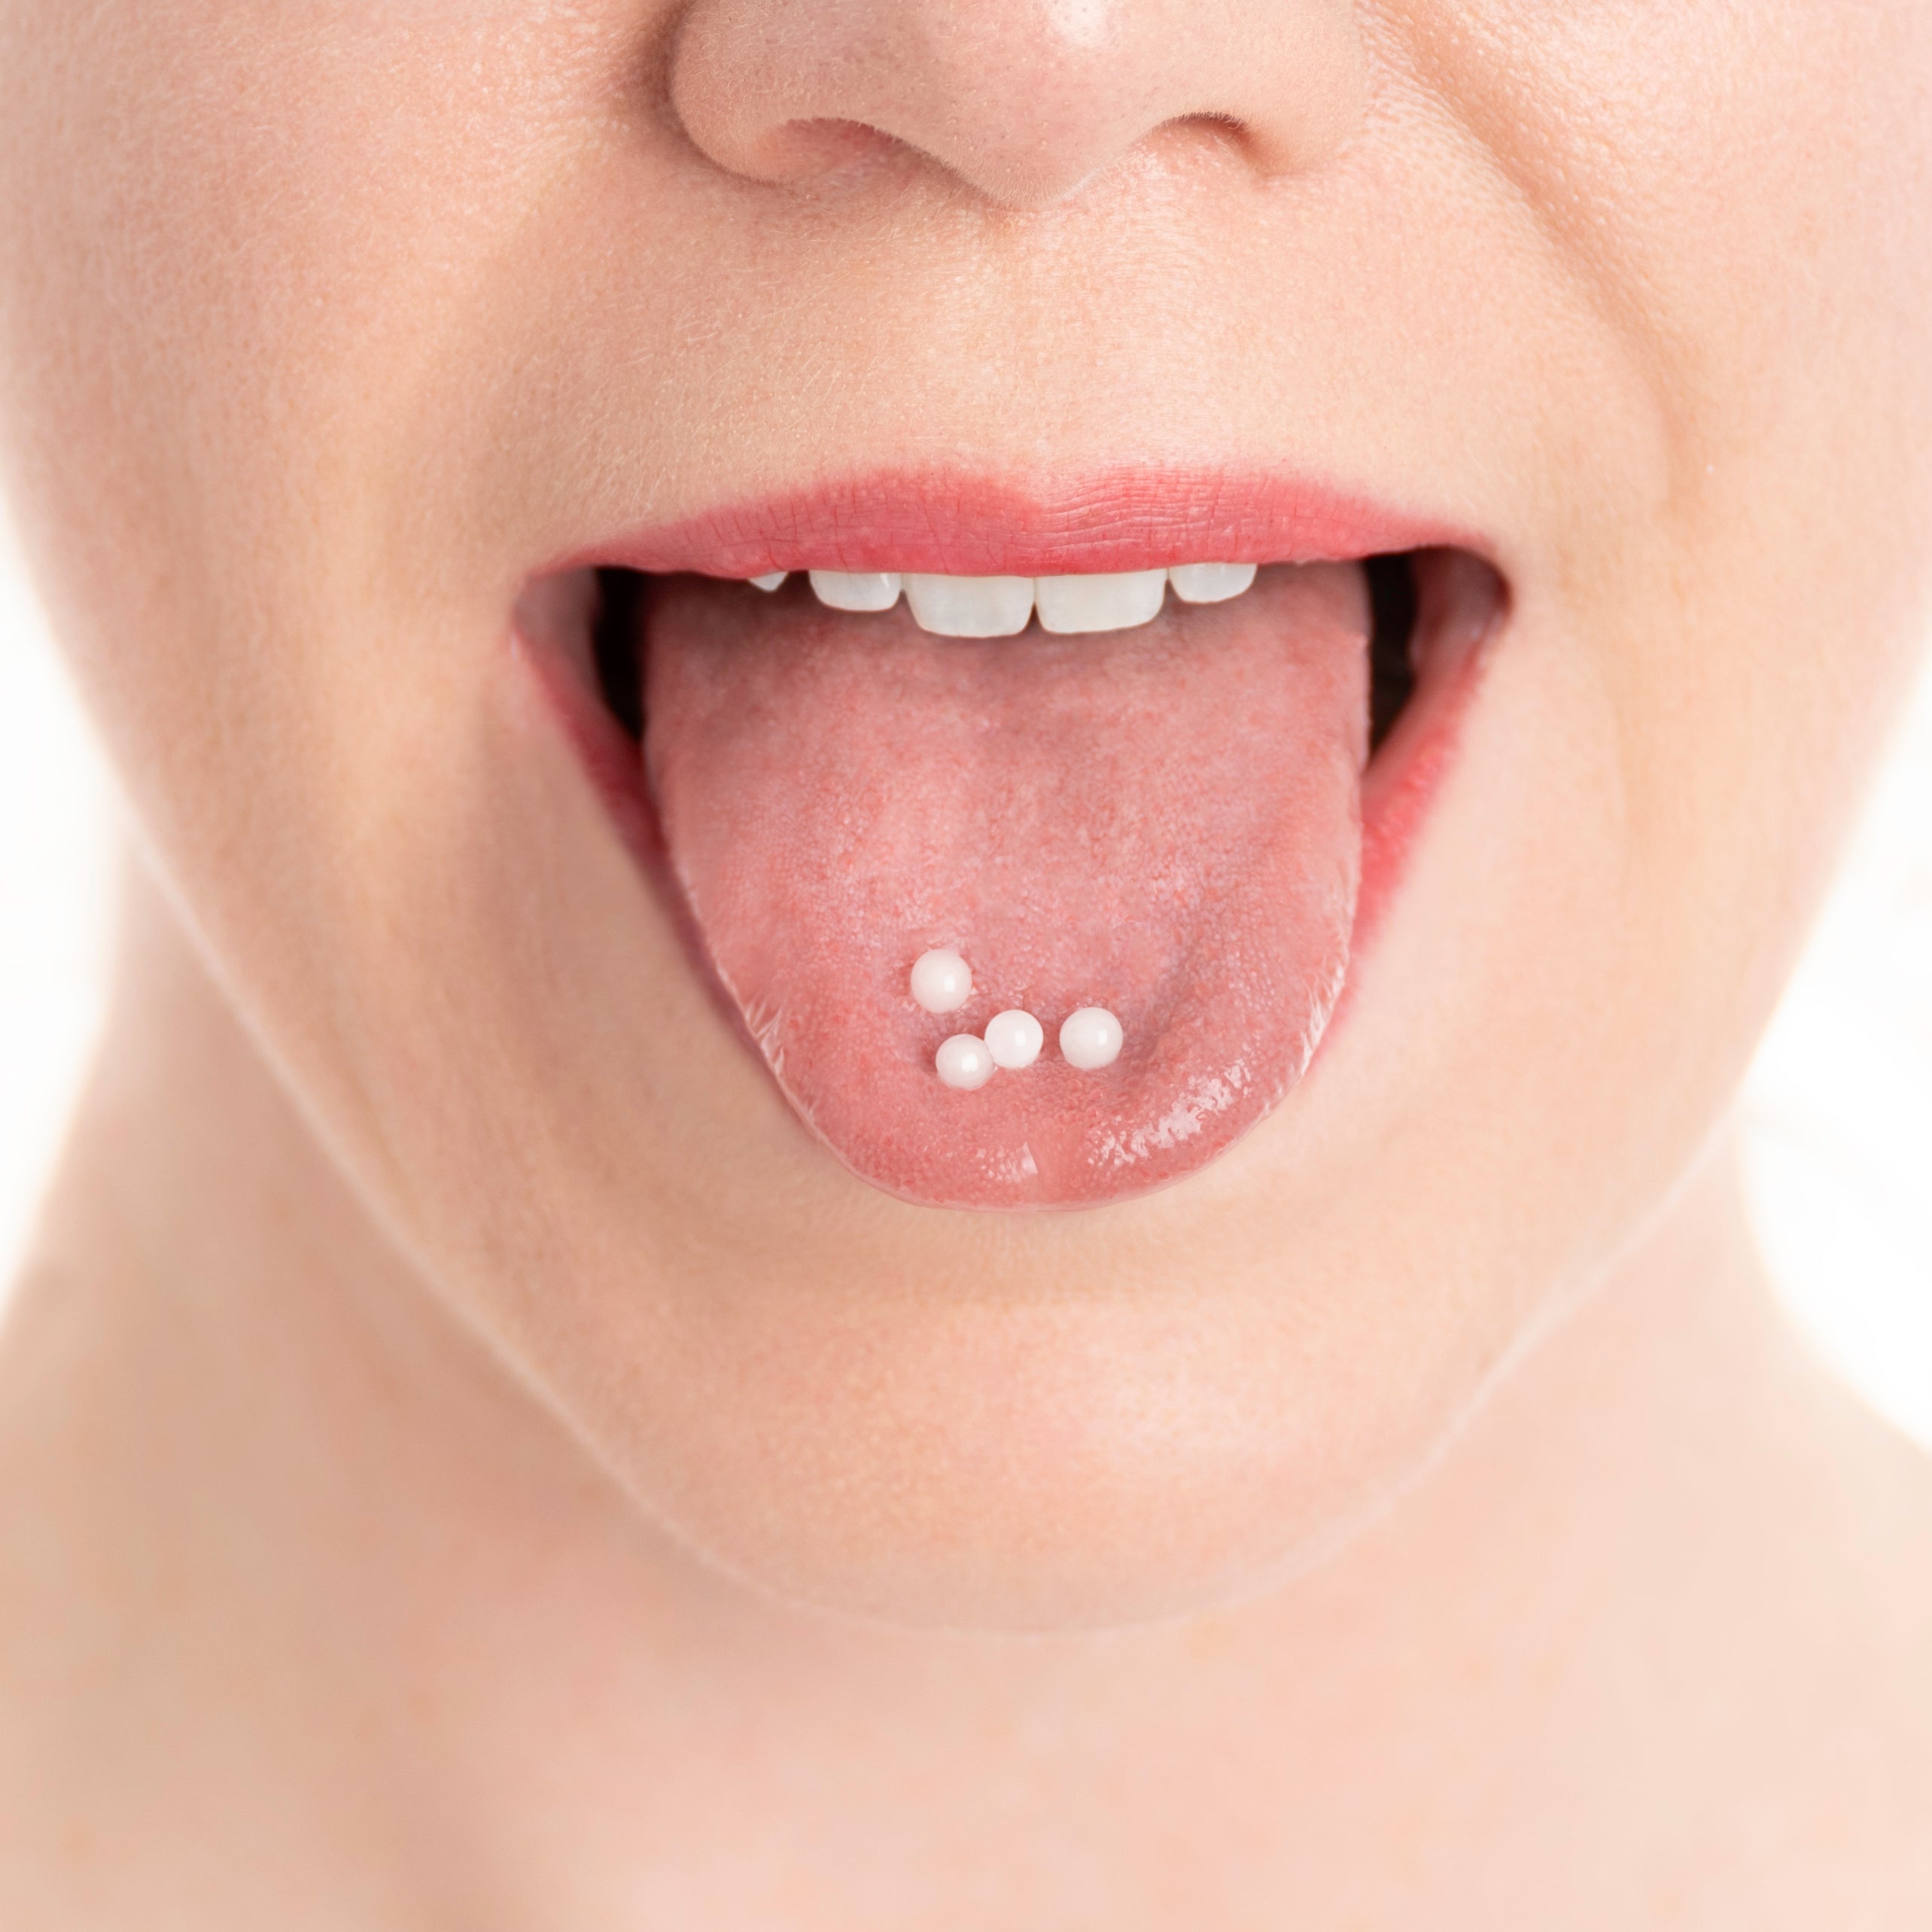 Novel Ways to Select a Cell Salt Part 1: Look at Your Tongue